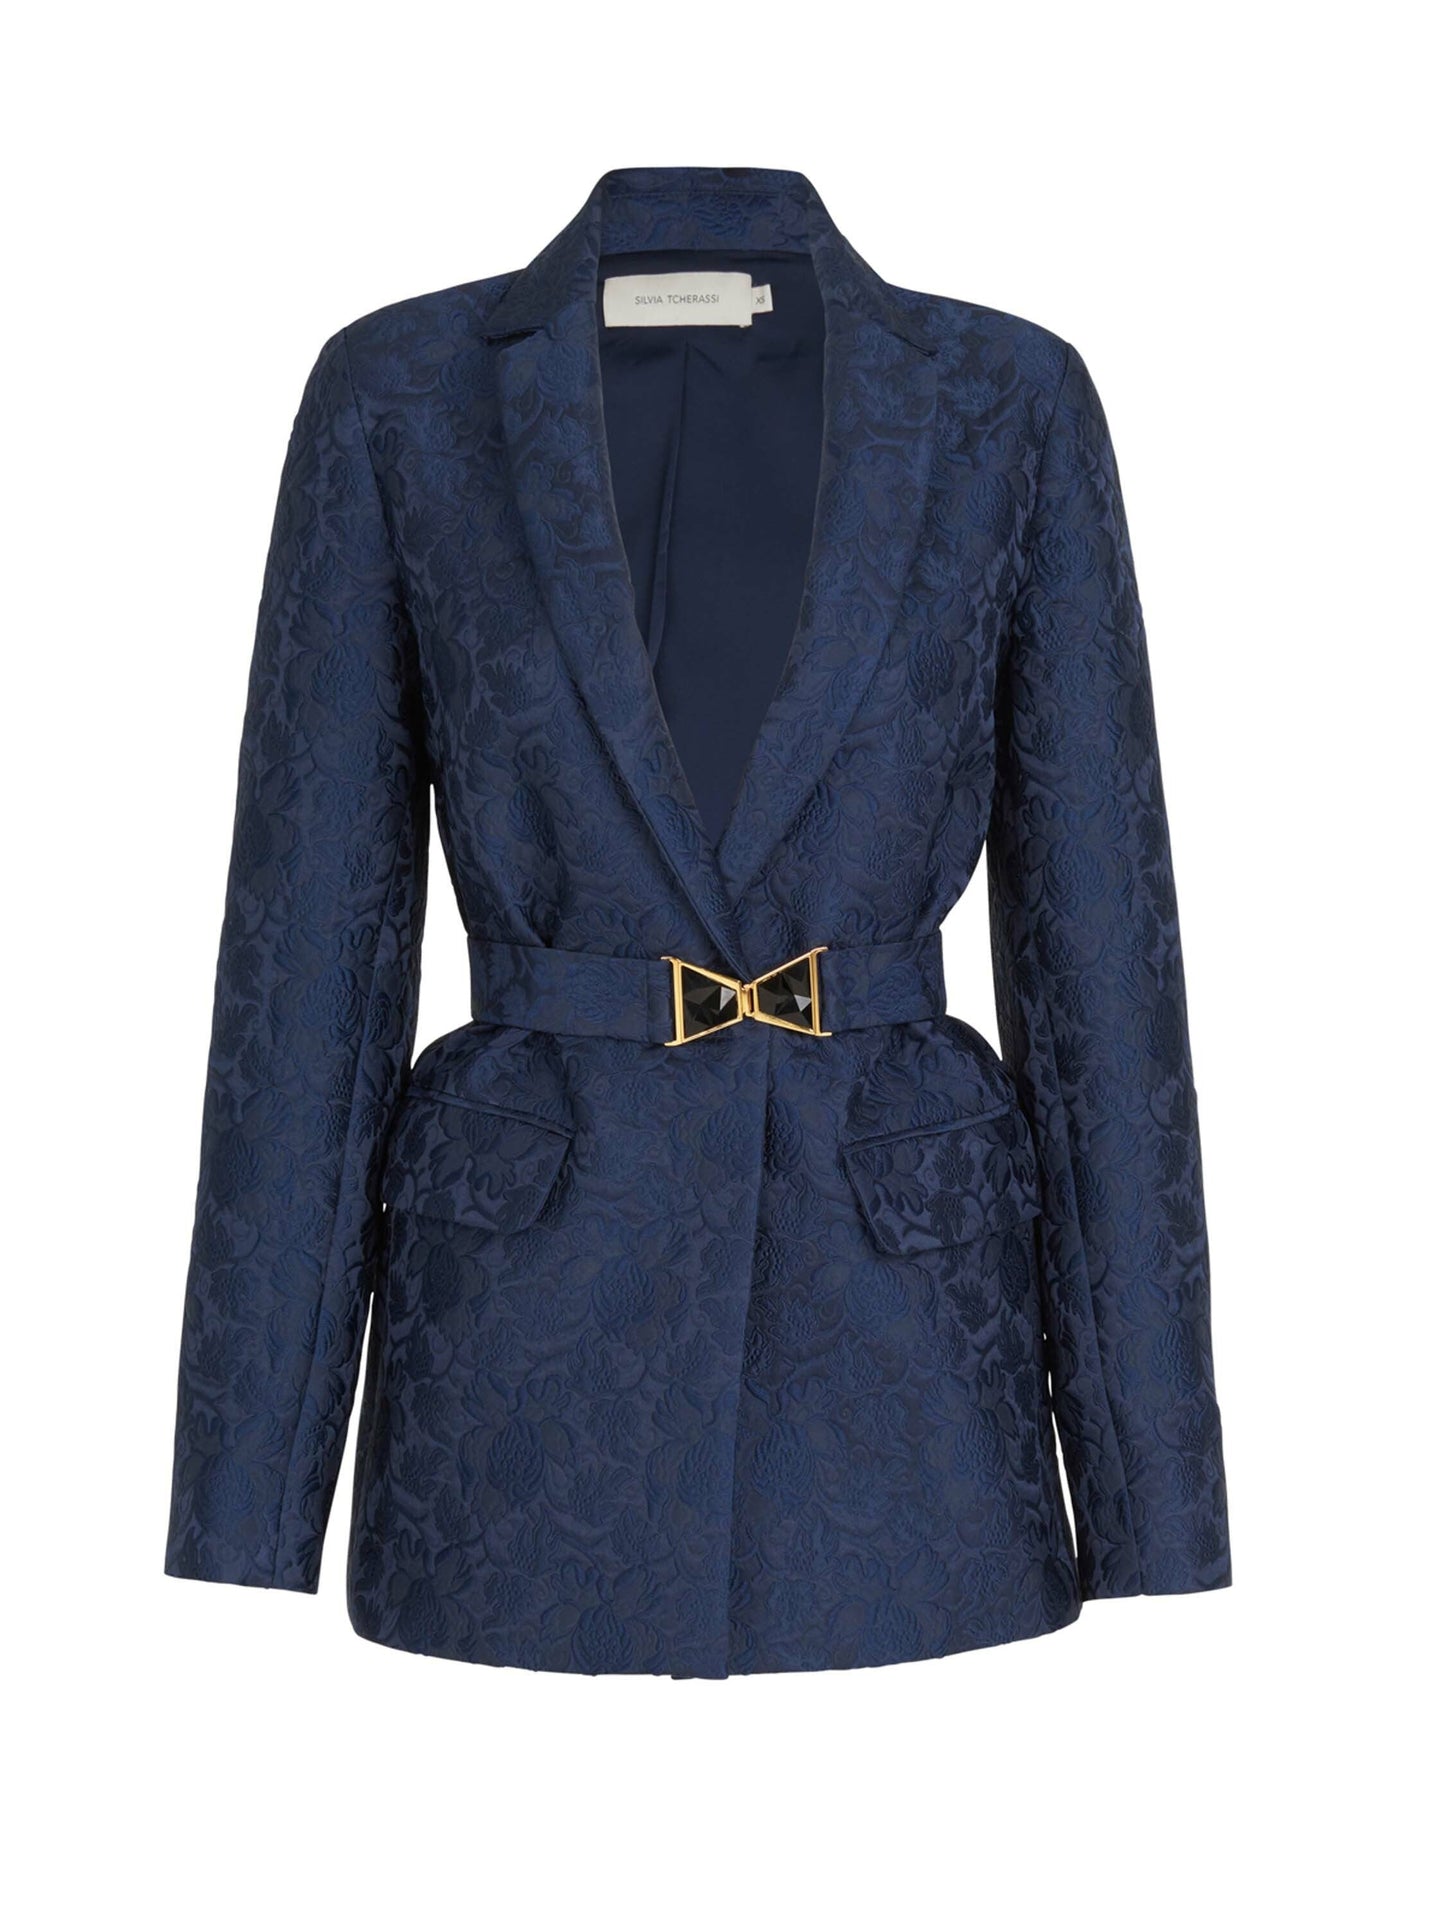 An elegant Cuneo Jacket Navy with a gold buckle, perfect for formal occasions.